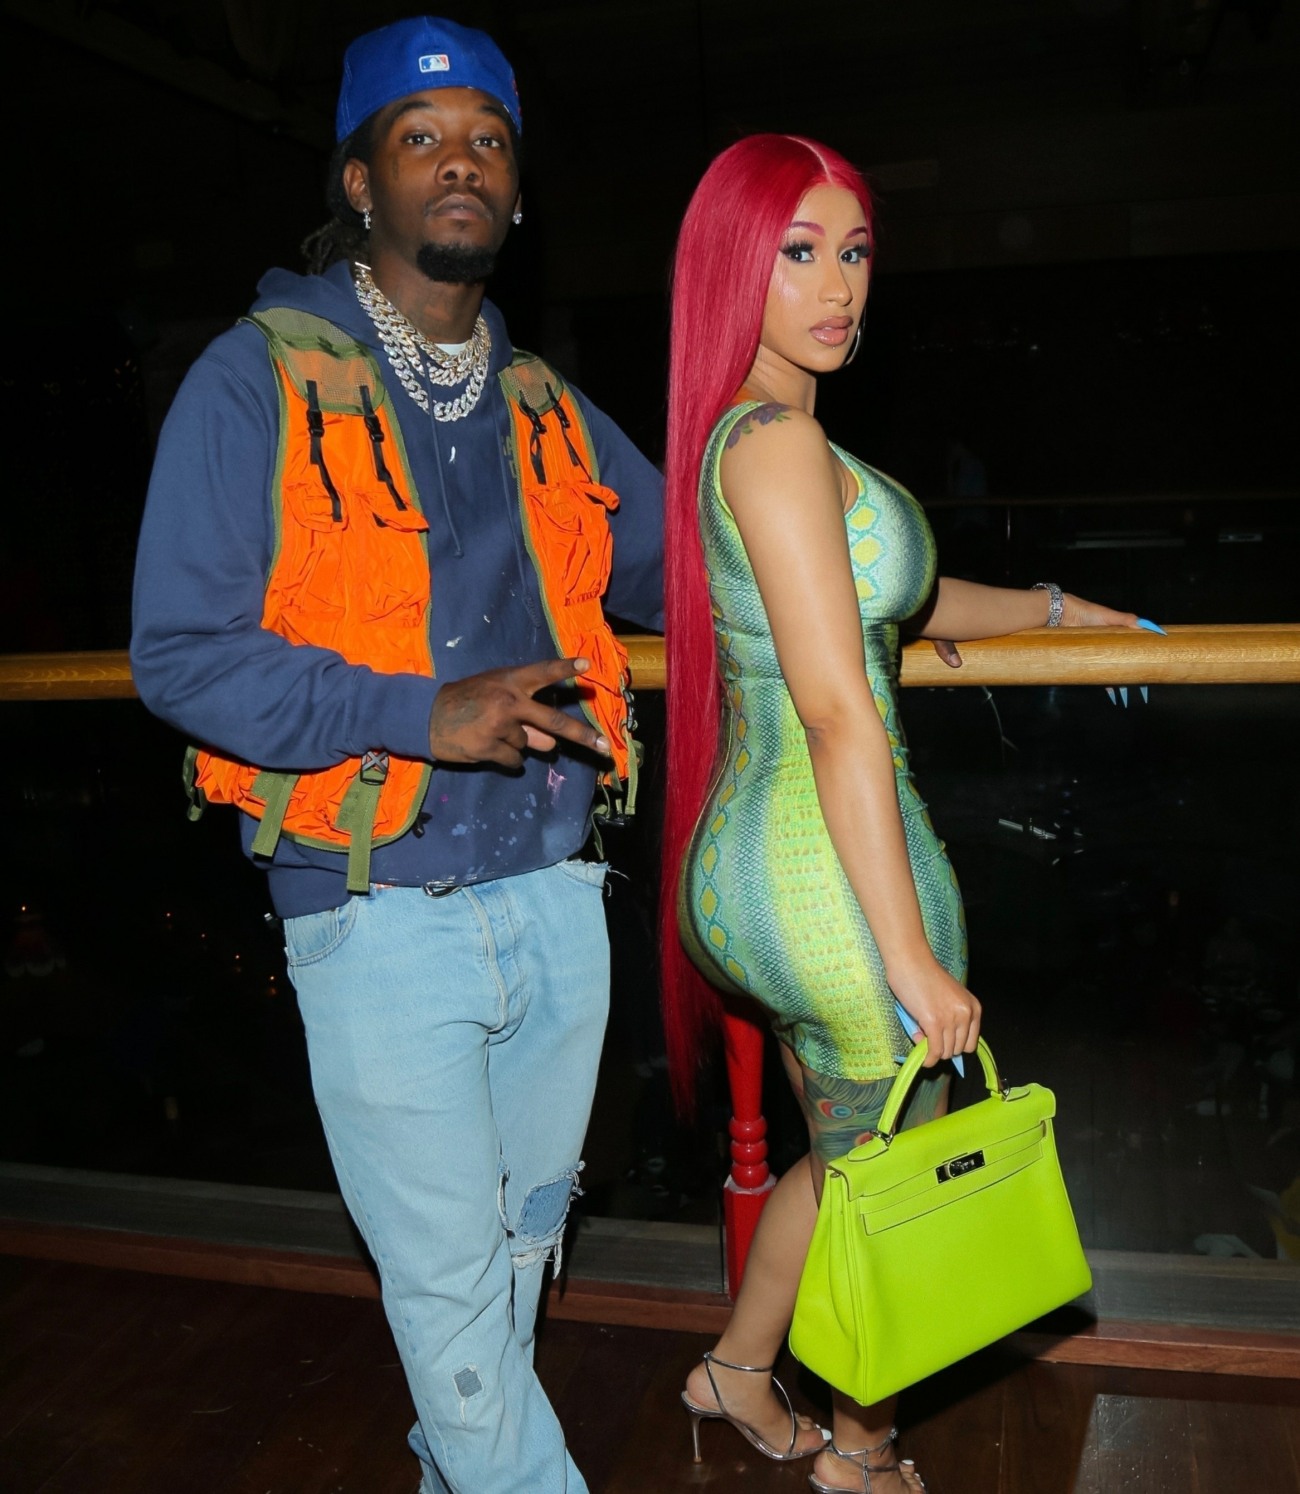 Cardi B and Offset share intimate moment at dinner in Los Angeles